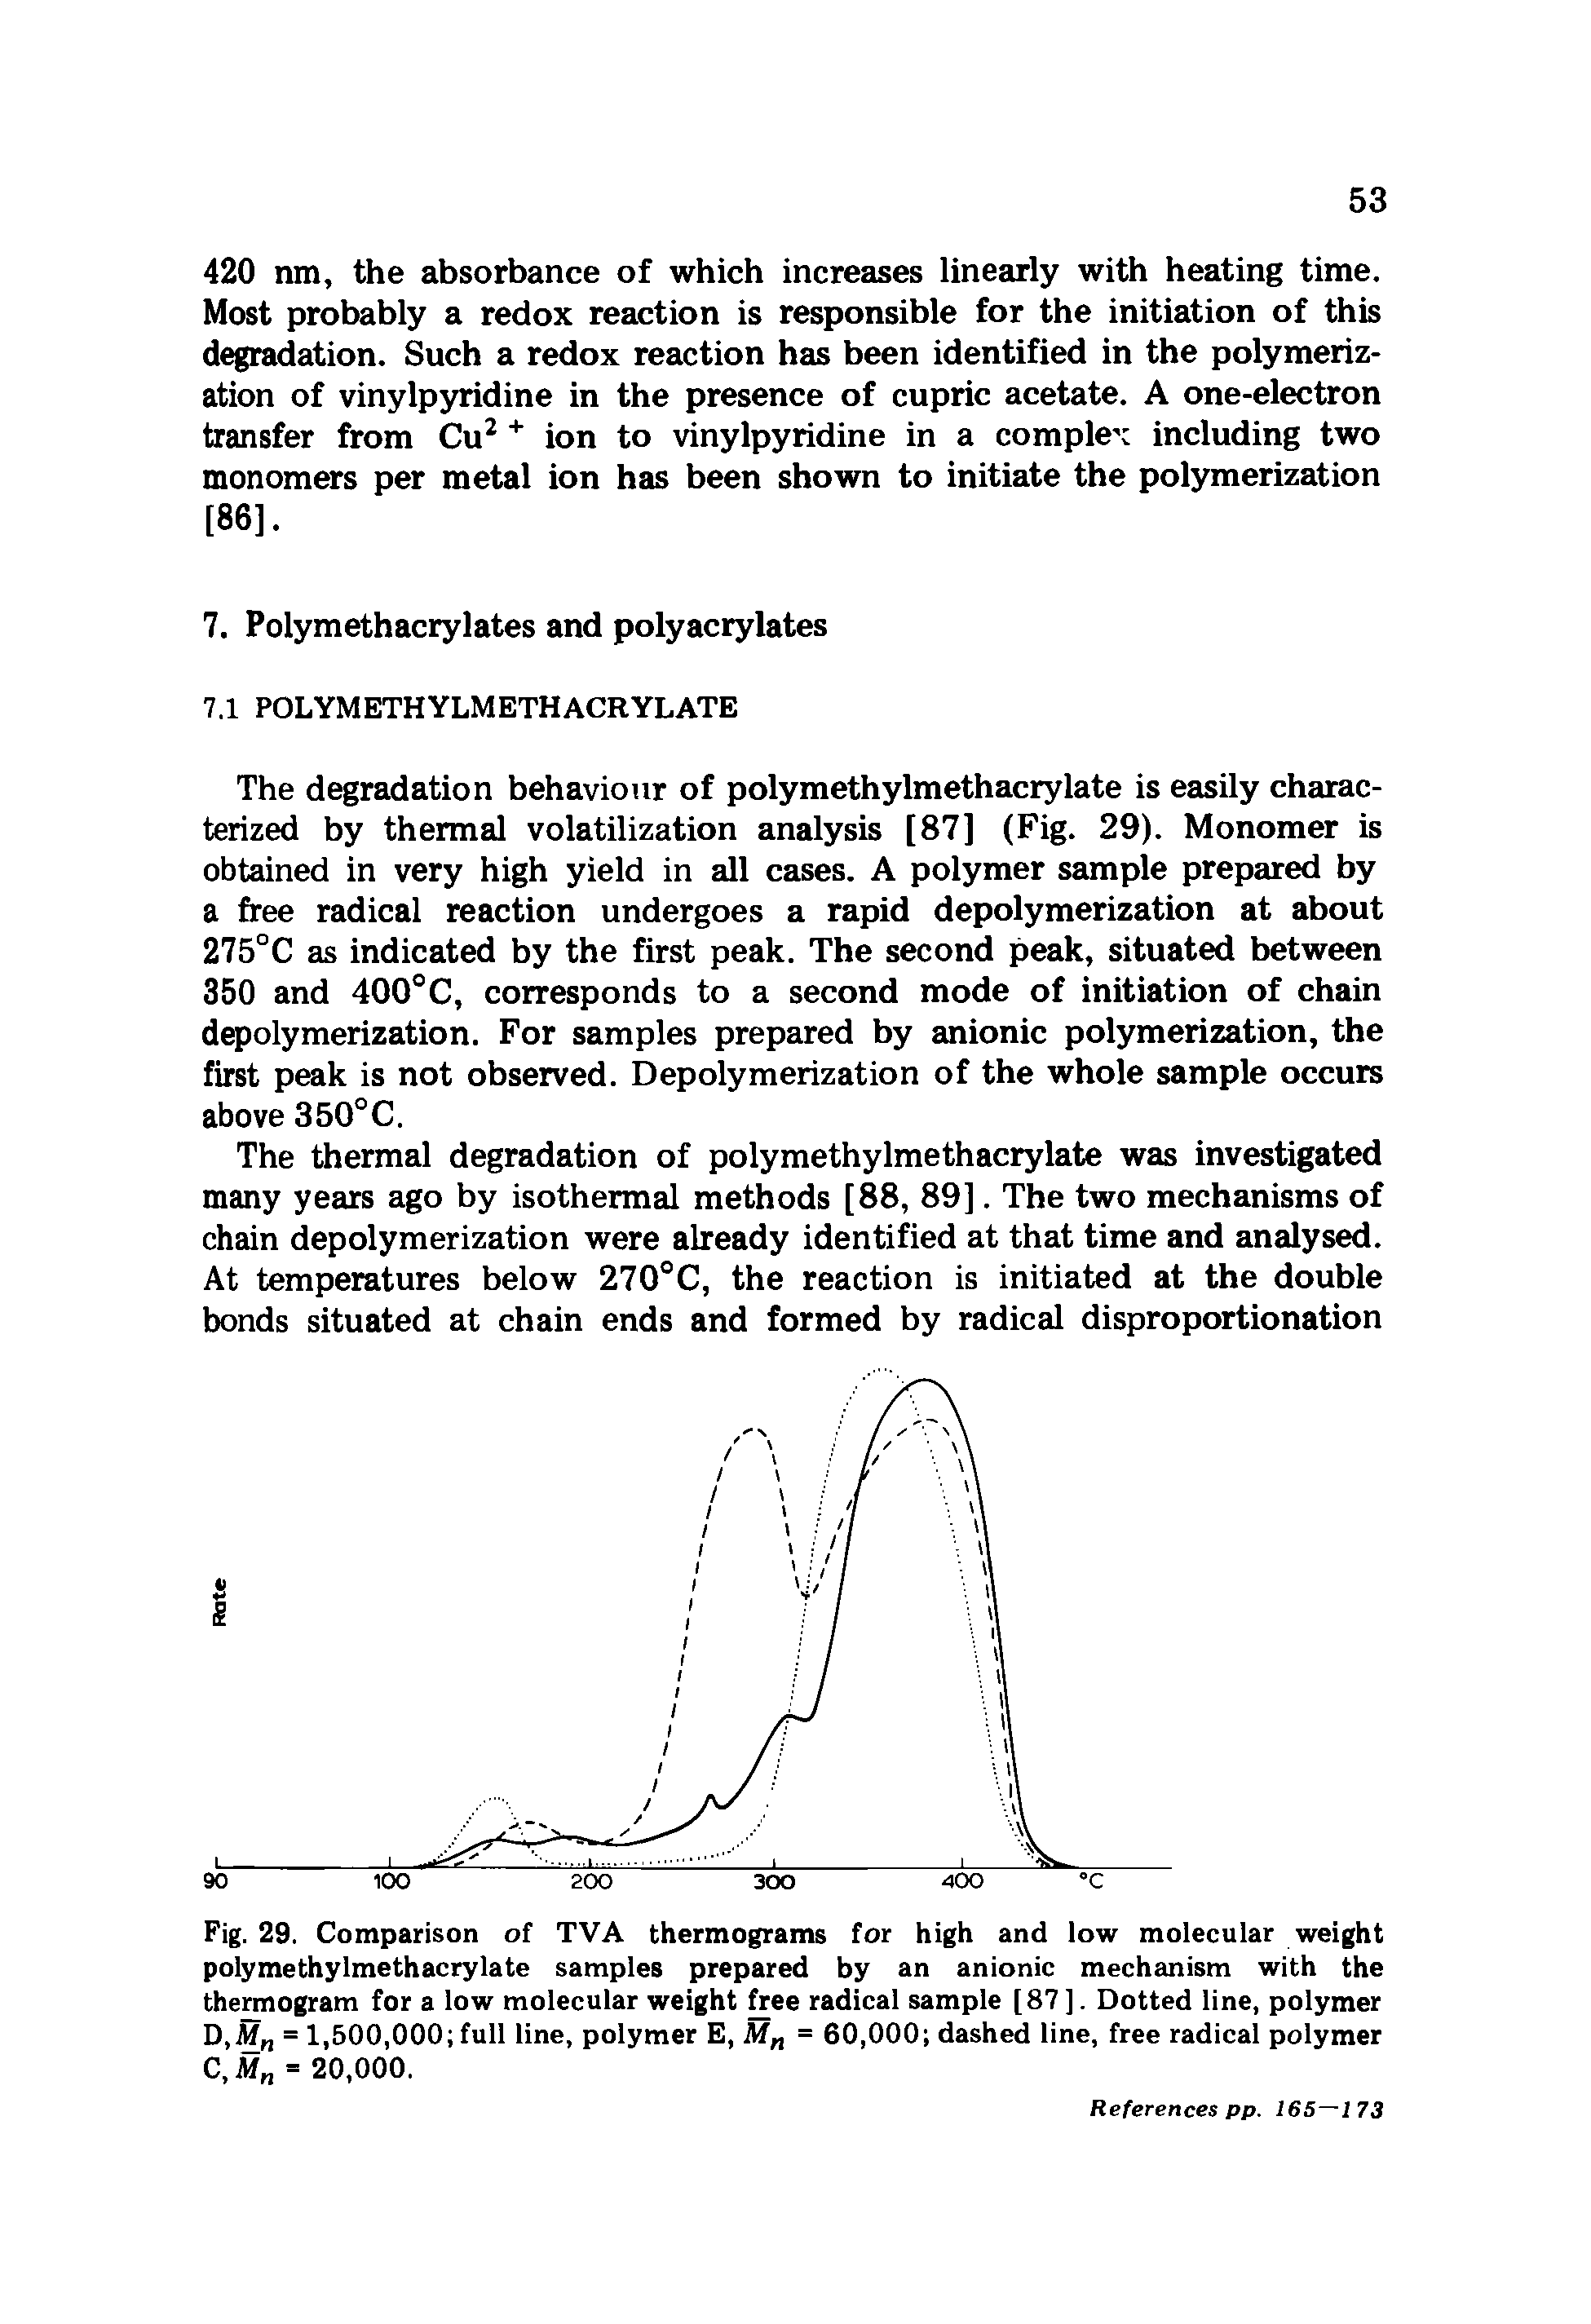 Fig. 29. Comparison of TVA thermograms for high and low molecular weight polymethylmethacrylate samples prepared by an anionic mechanism with the thermogram for a low molecular weight free radical sample [87], Dotted line, polymer D,M = 1,500,000 full line, polymer E, M = 60,000 dashed line, free radical polymer C, M = 20,000.